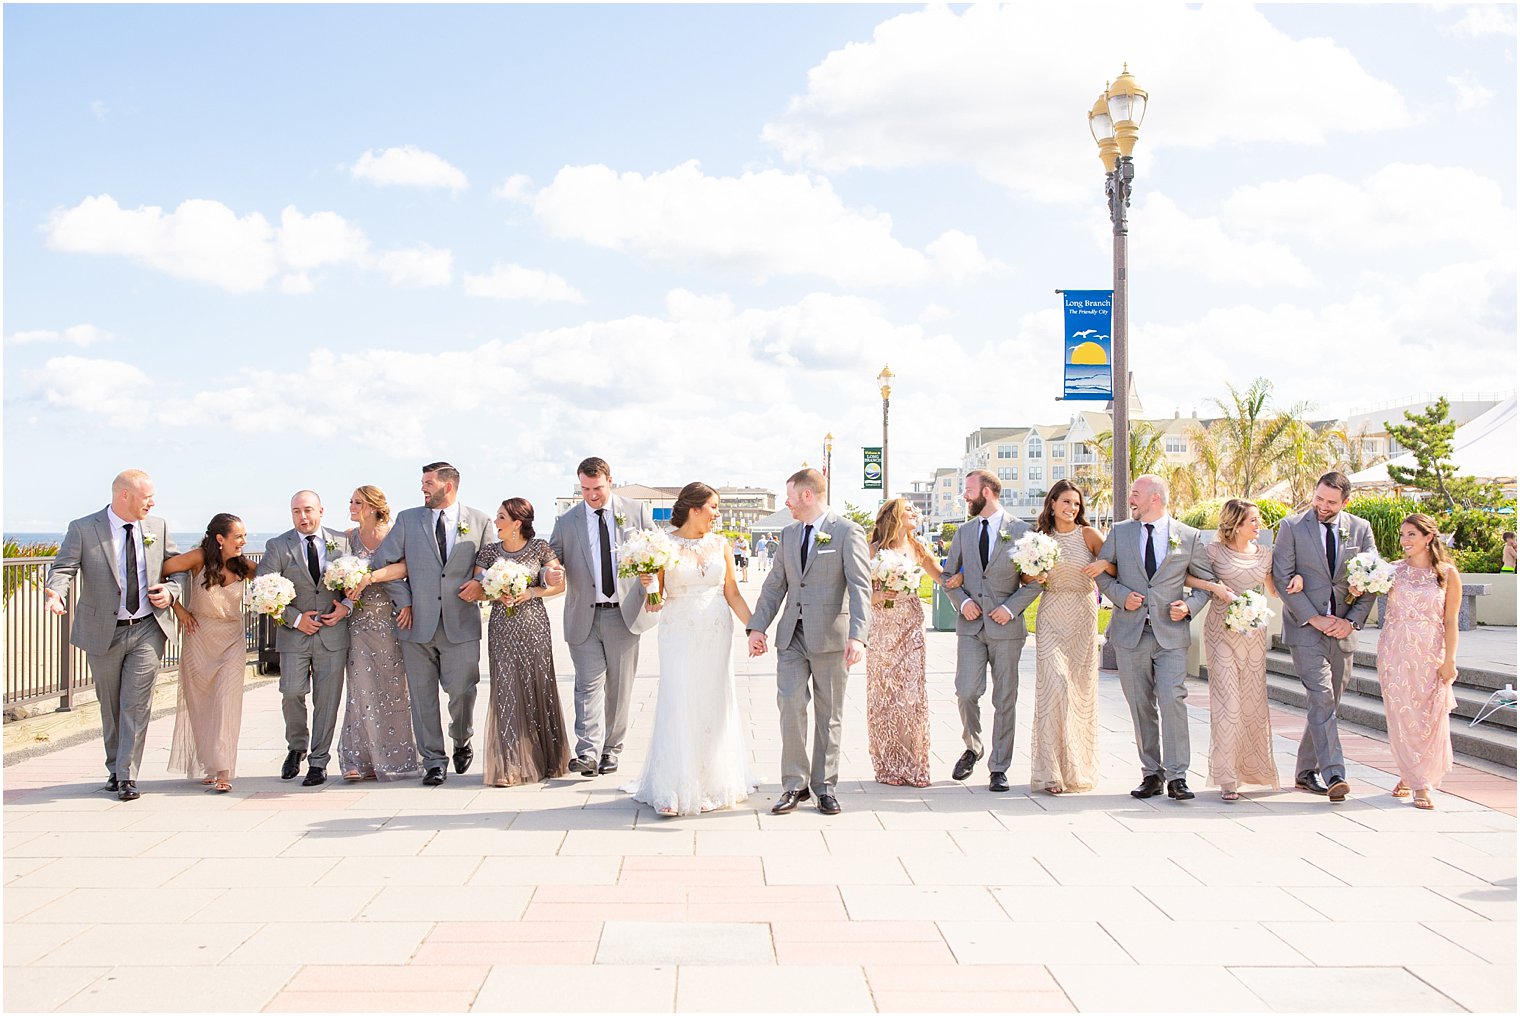 Gatsby inspired wedding party in Long Branch, NJ photographed by Idalia Photography